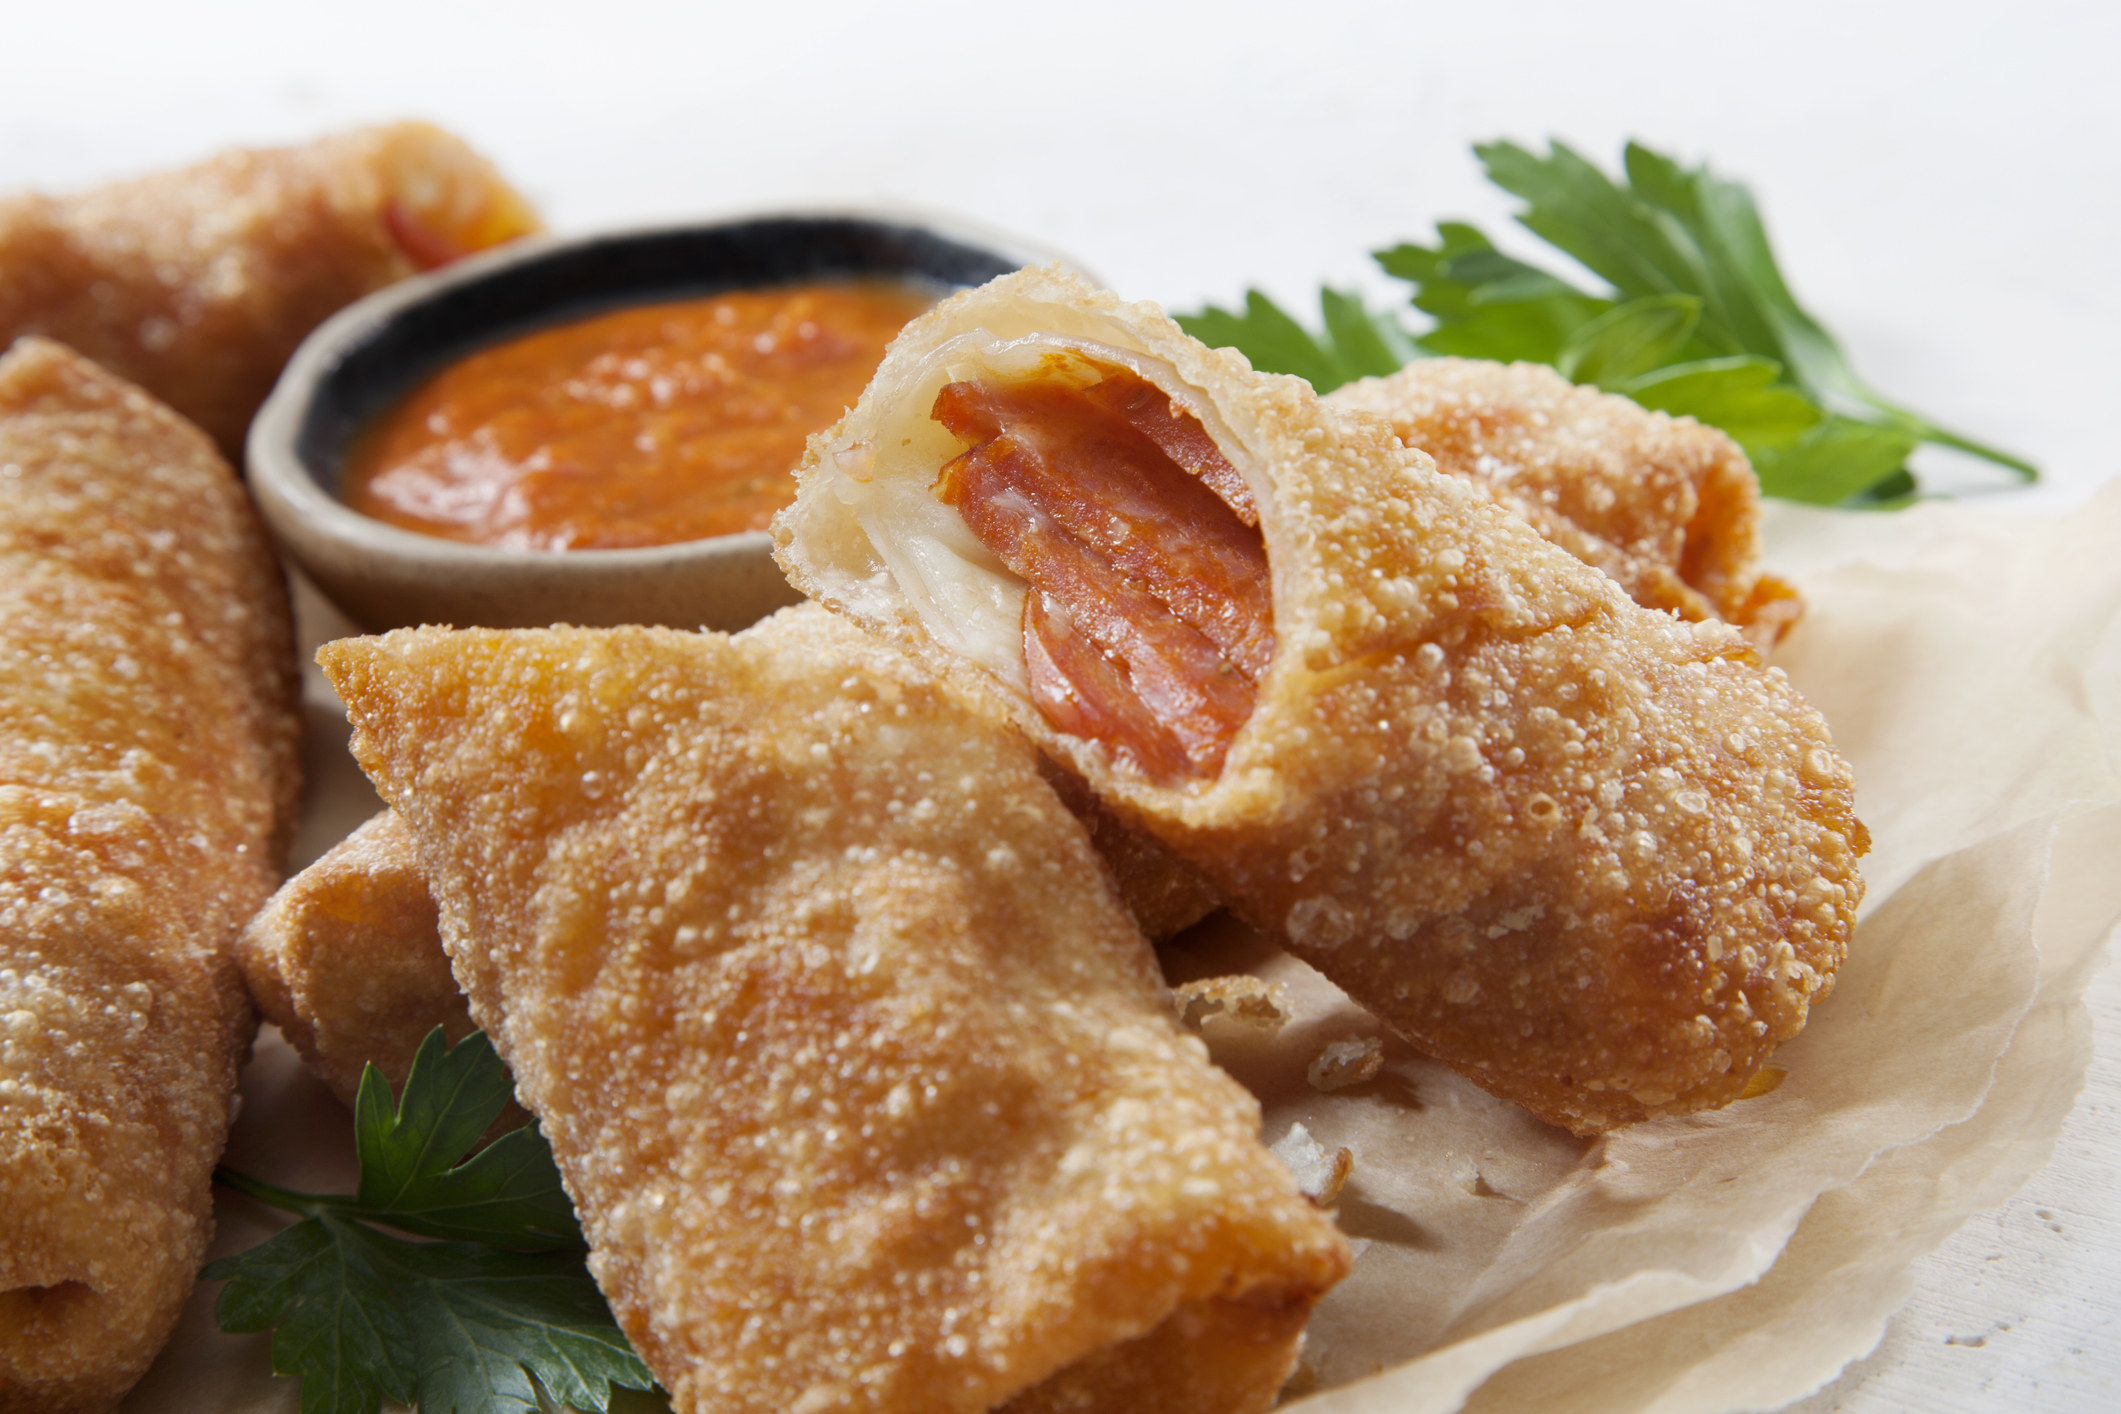 Pepperoni pizza rolls with dipping sauce.